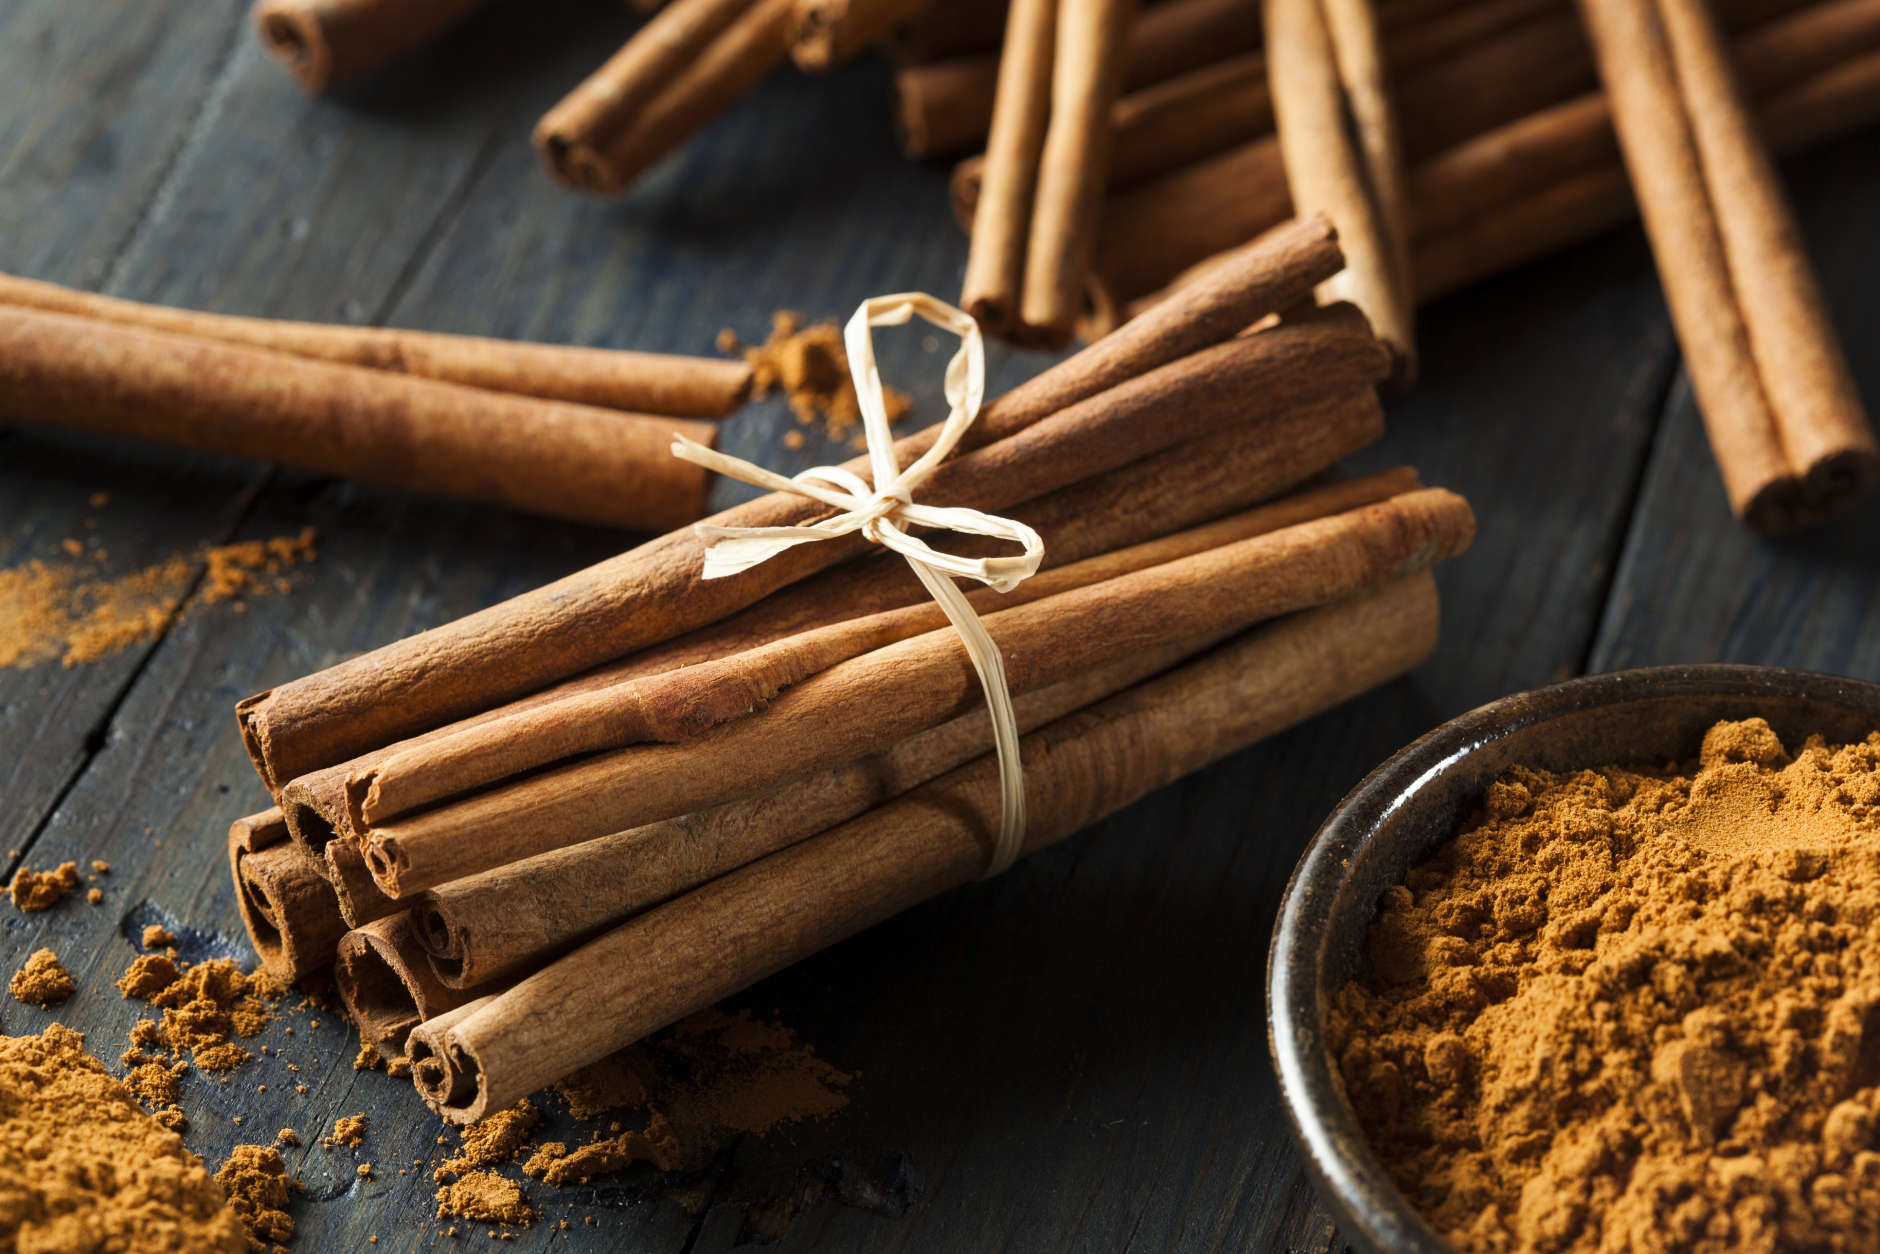 Adding flavor with herbs and spices makes food taste better, and adding spices to foods makes it easier to reduce added sugars, excess salt and saturated fats without reducing appeal. (Thinkstock) 